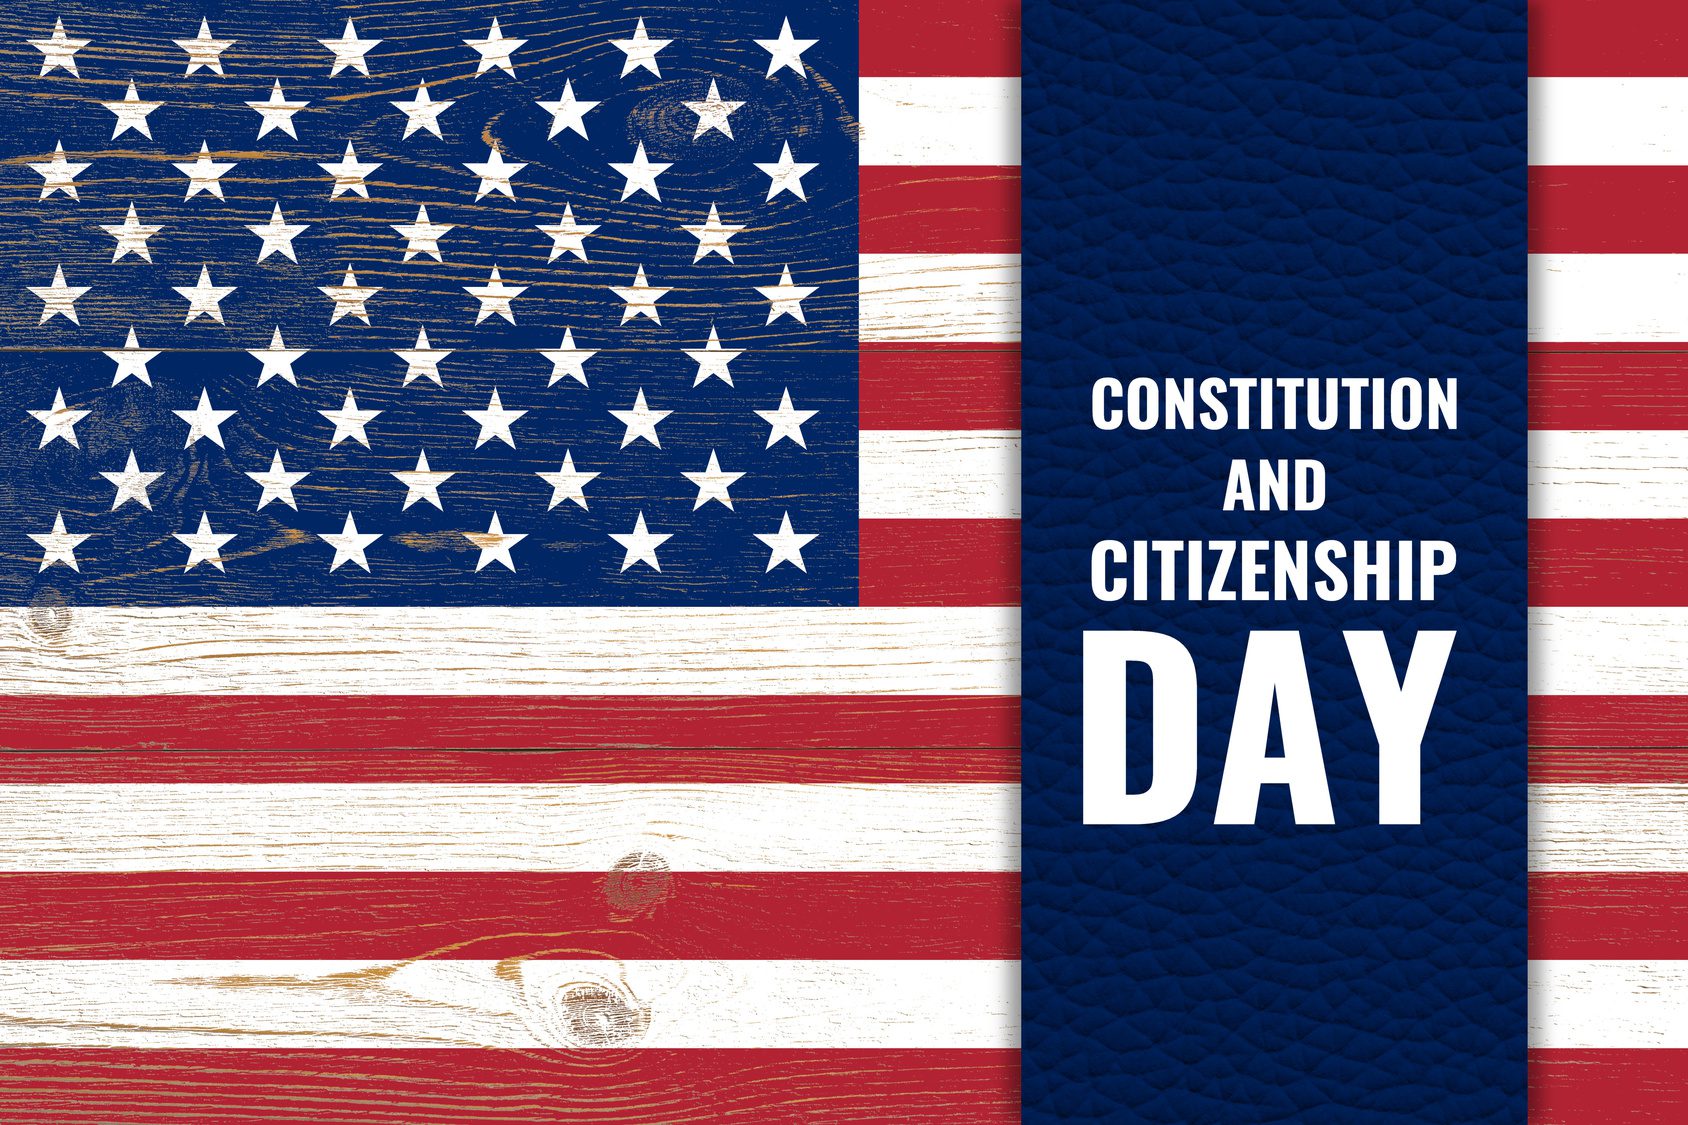 Constitution and Citizenship Day Sees 45,000 New U.S. Citizens Take Oath